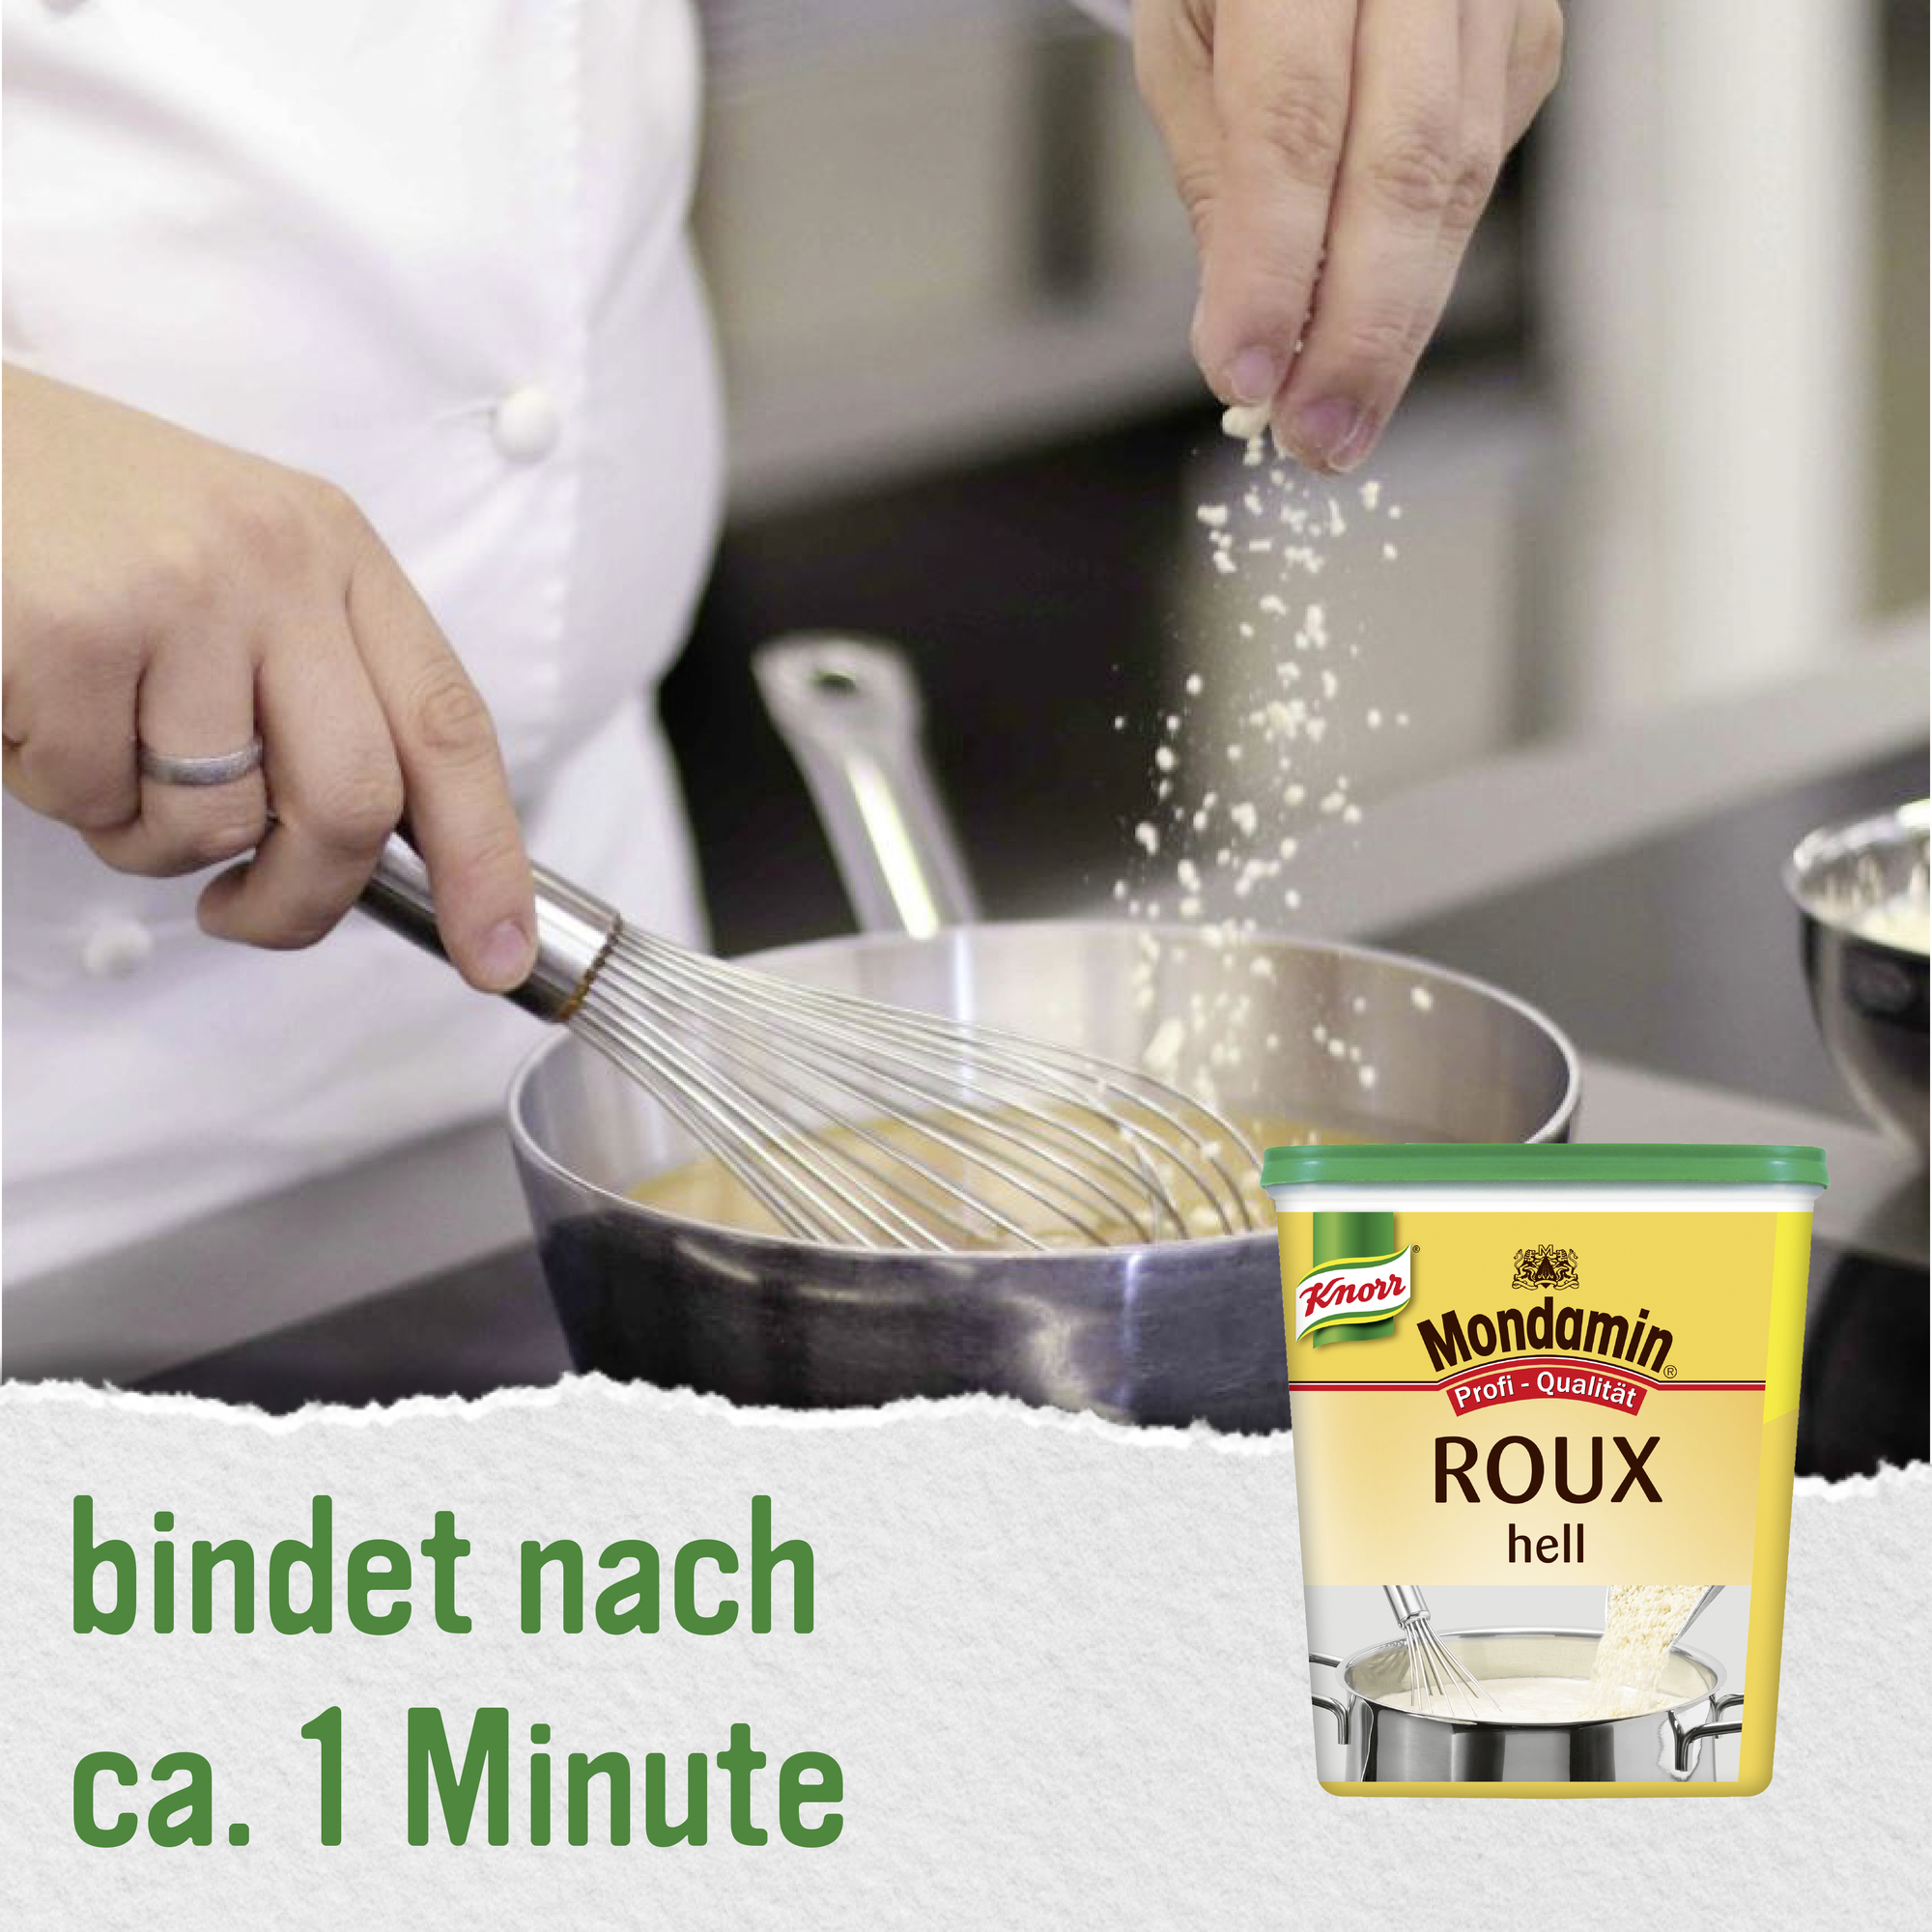 Roux hell 1000g